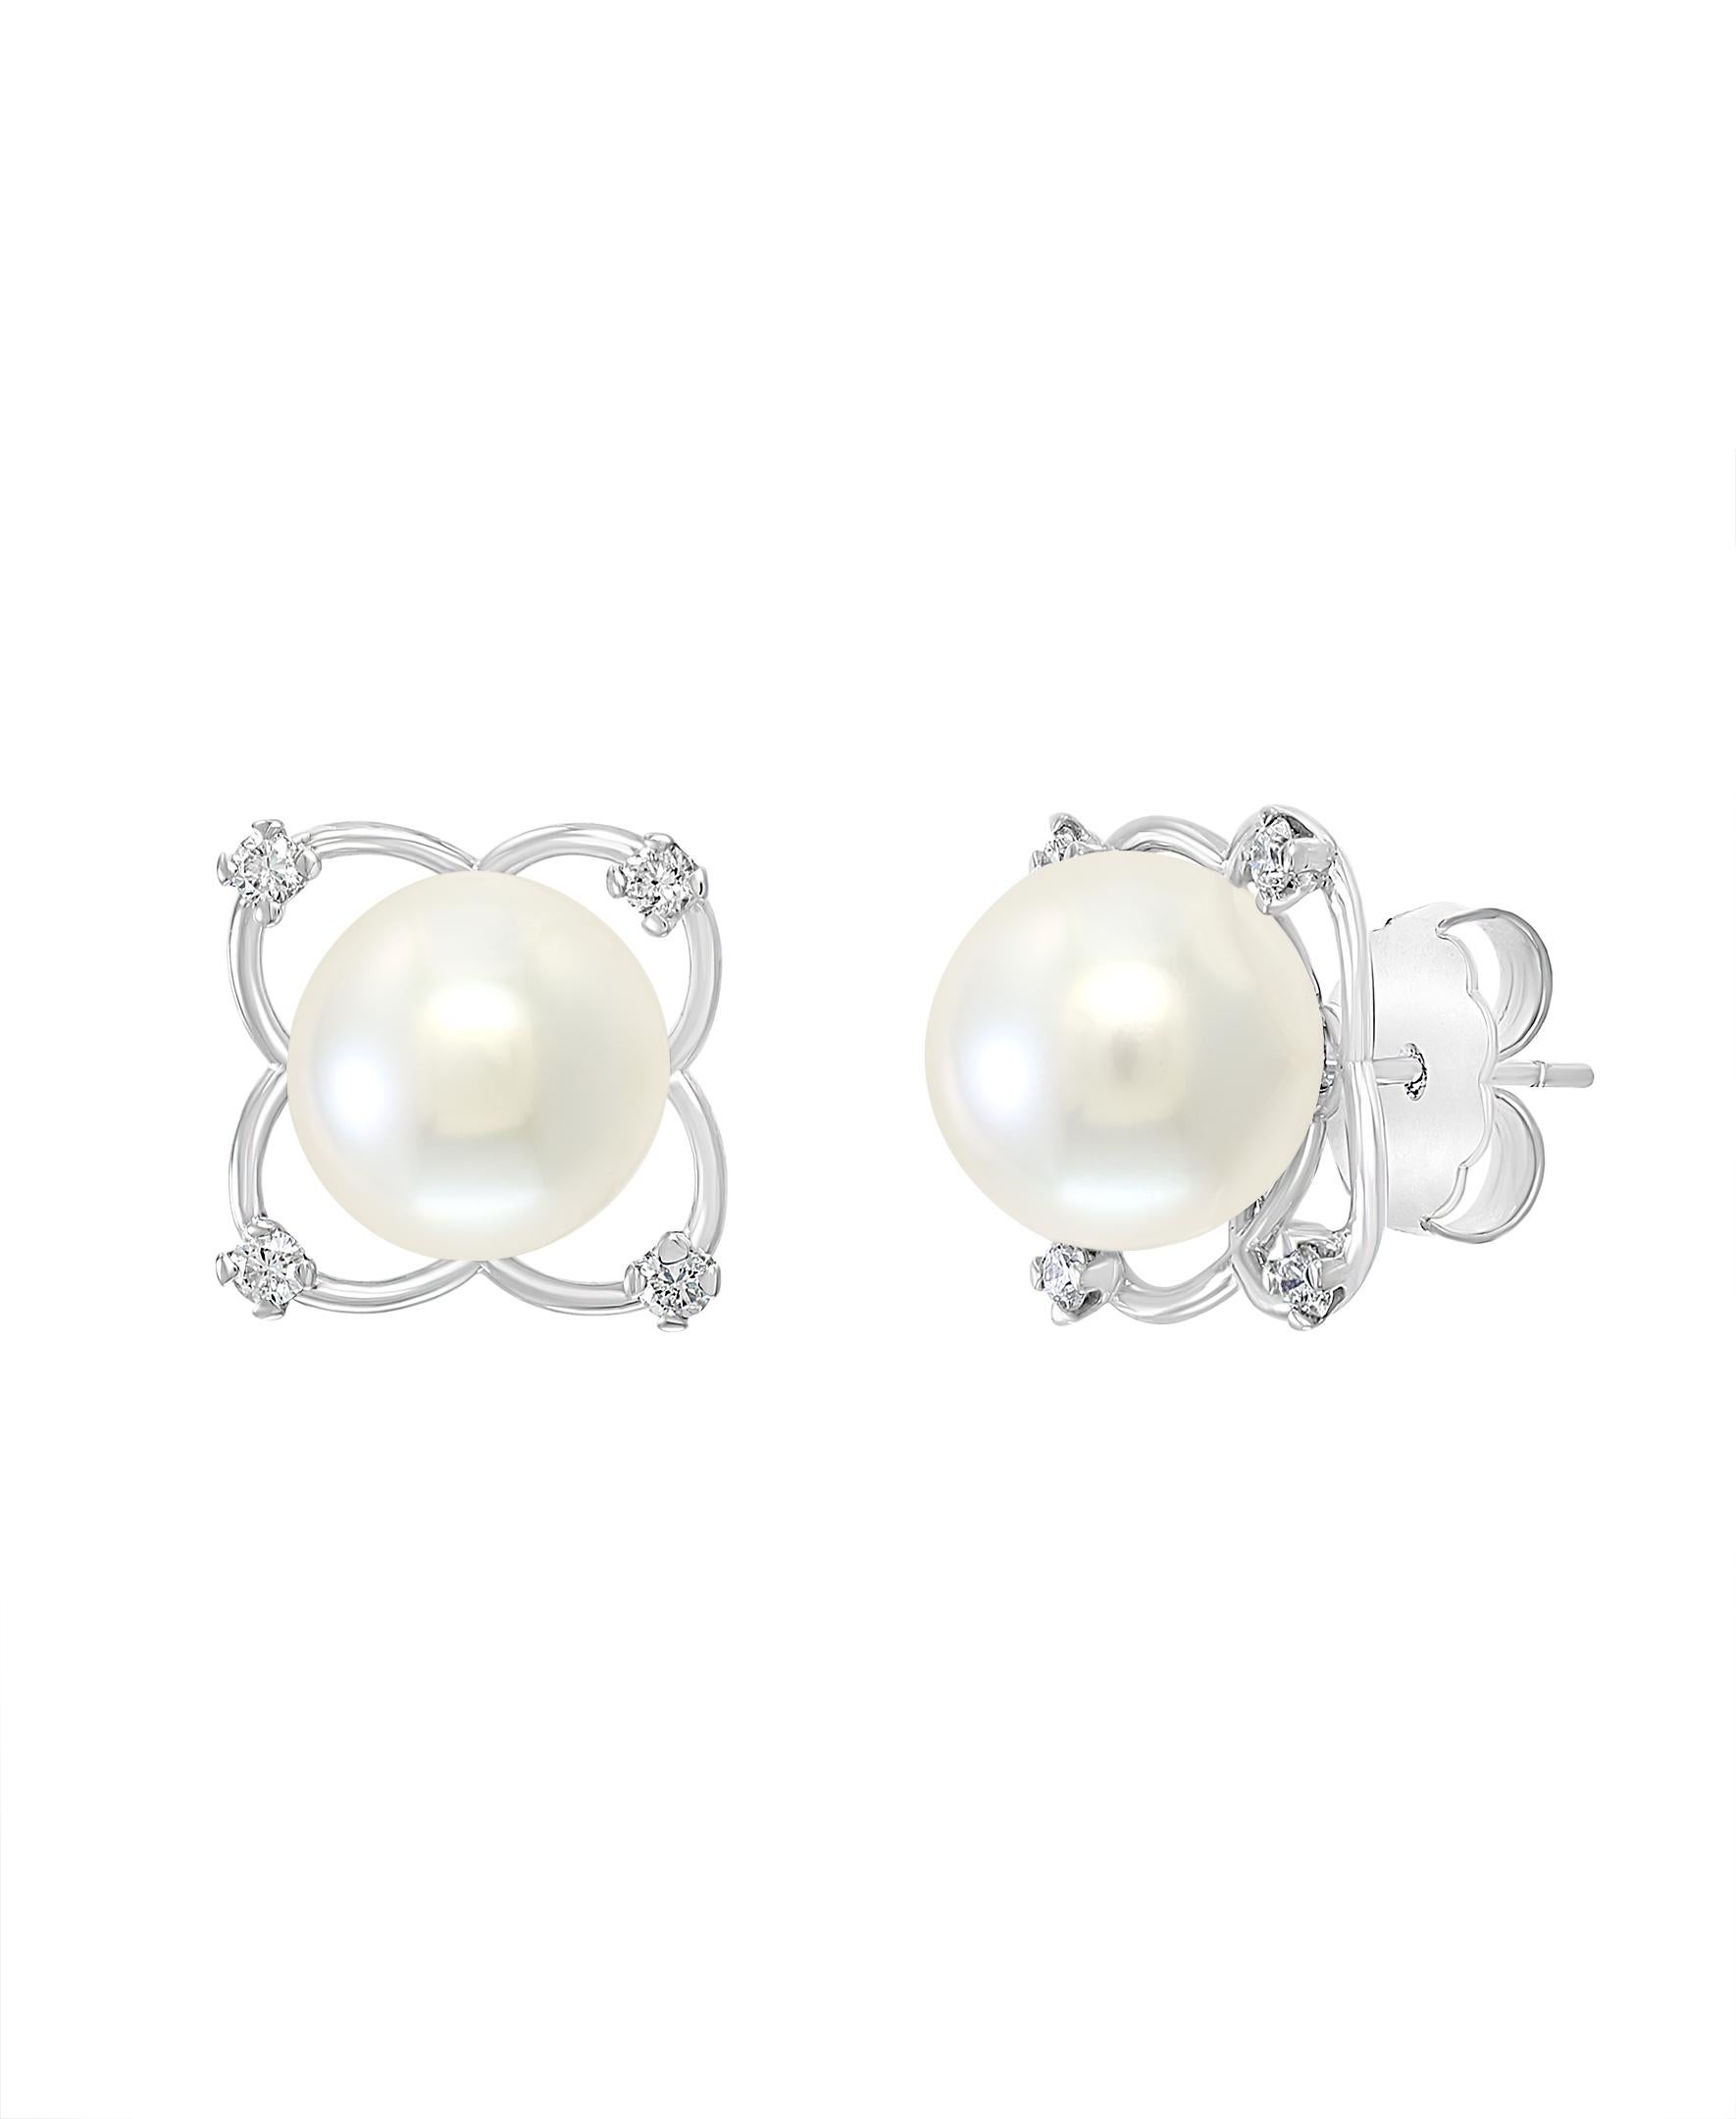 These elegant Diamond and Pearl earrings contain South Sea white round cultured pearls gracefully encased in white gold and diamonds. The floral design creates a striking enclosure for these lustrous pearls.
- 14K White Gold
- 0.40 carats of